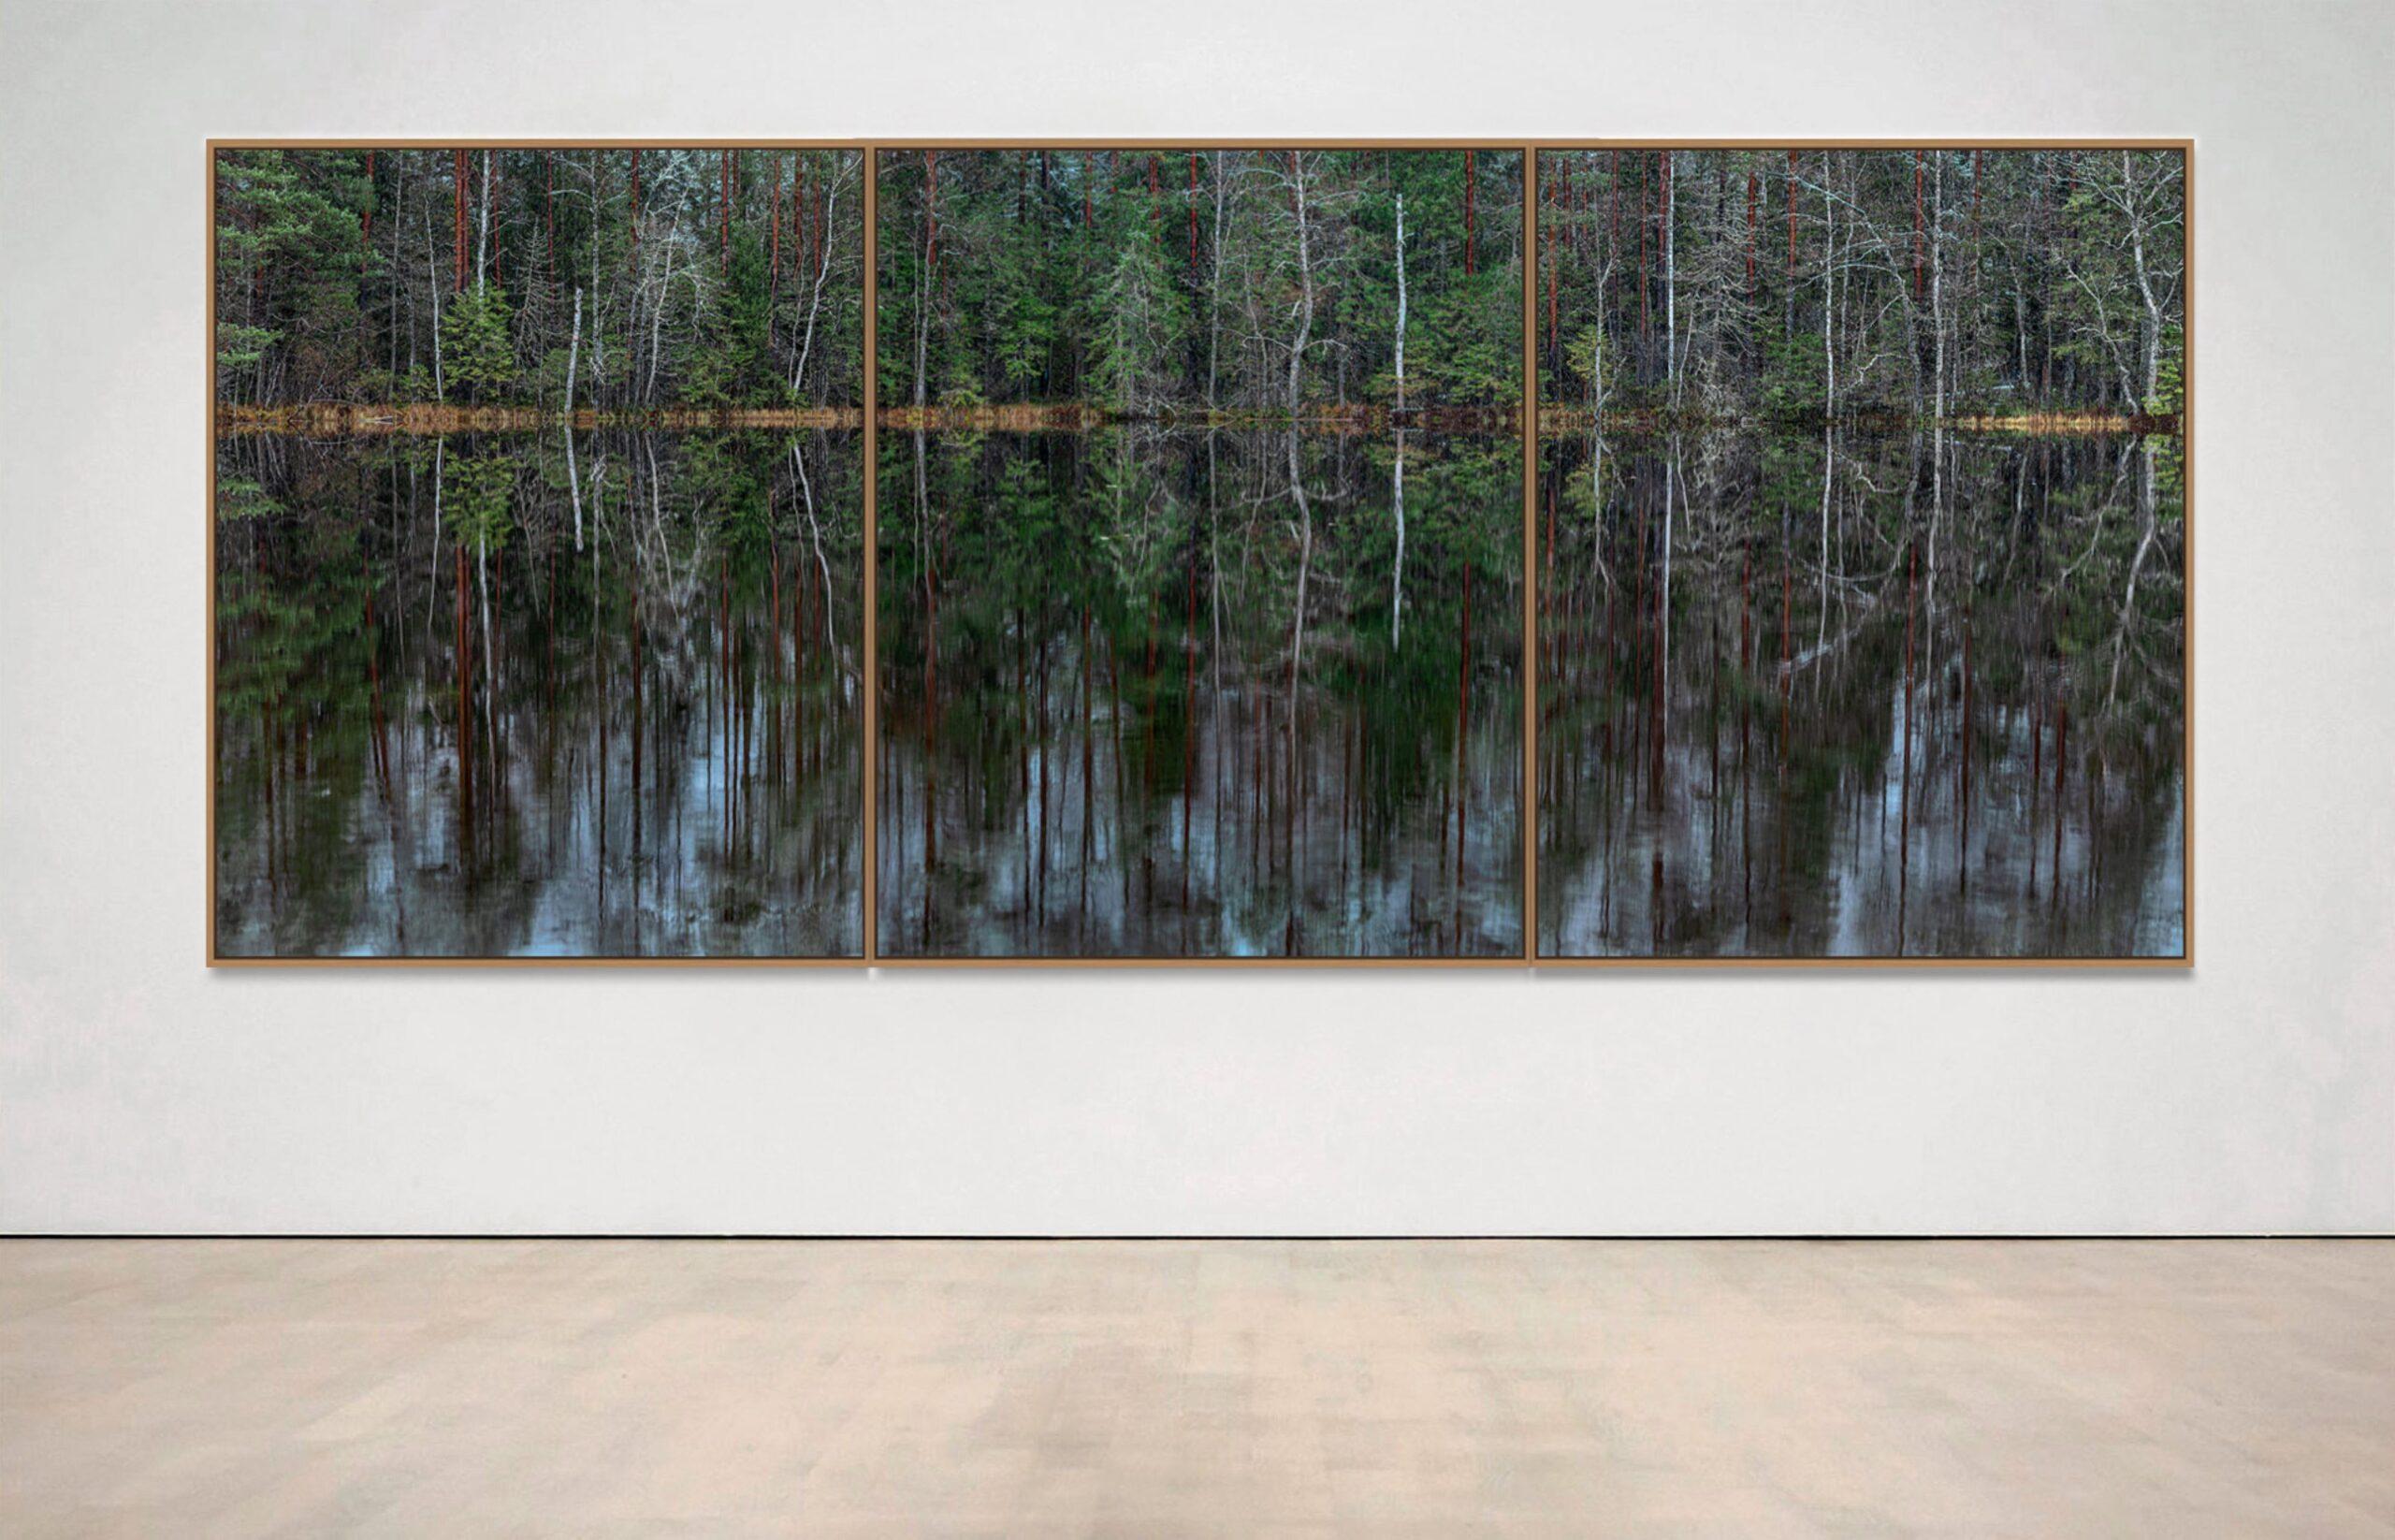 Deep Mirroring Forest 013 by Bernhard Lang - Landscape photography, trees, green For Sale 3